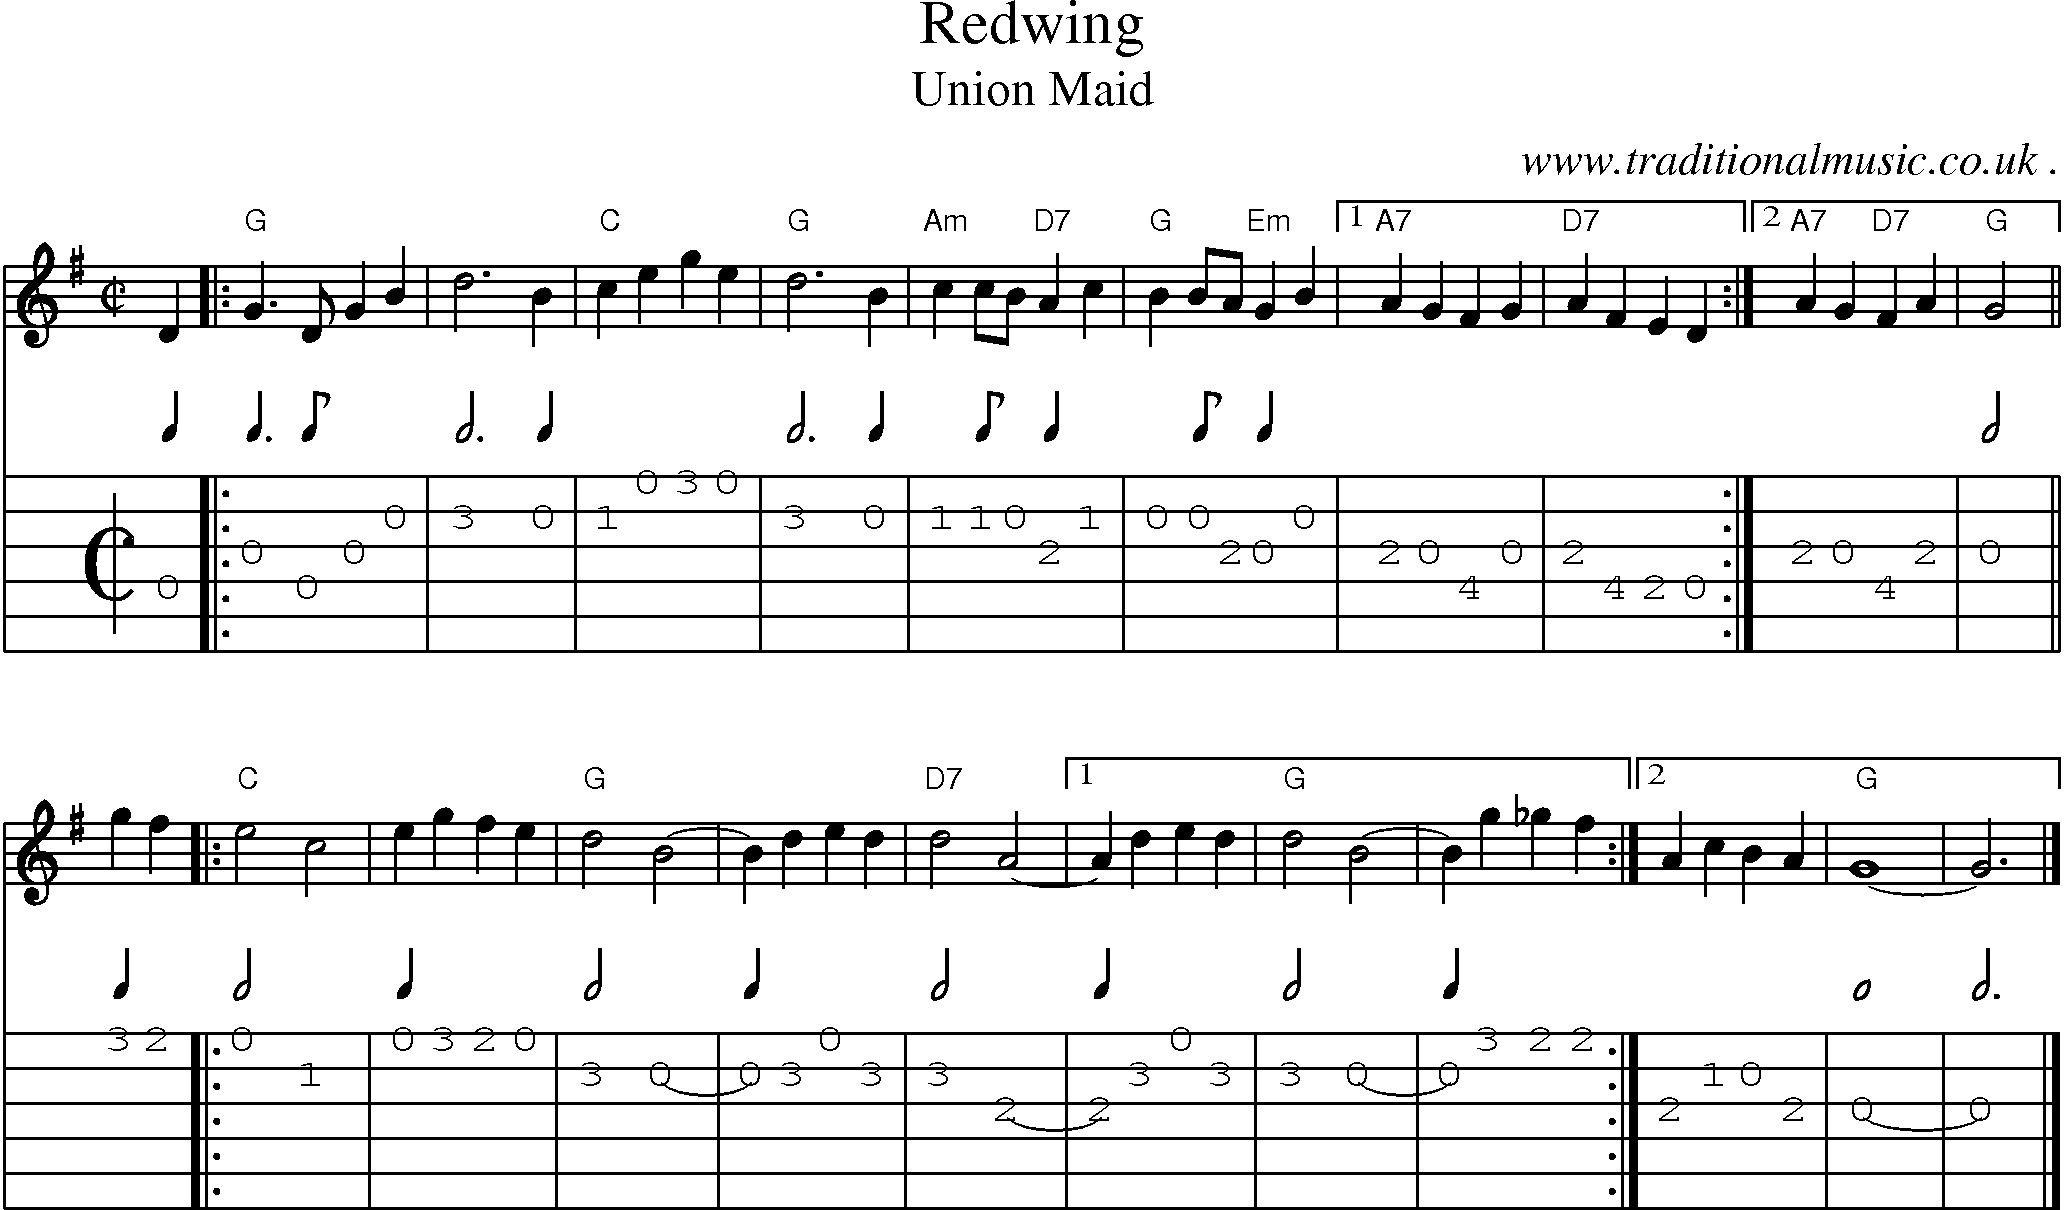 Sheet-music  score, Chords and Guitar Tabs for Redwing